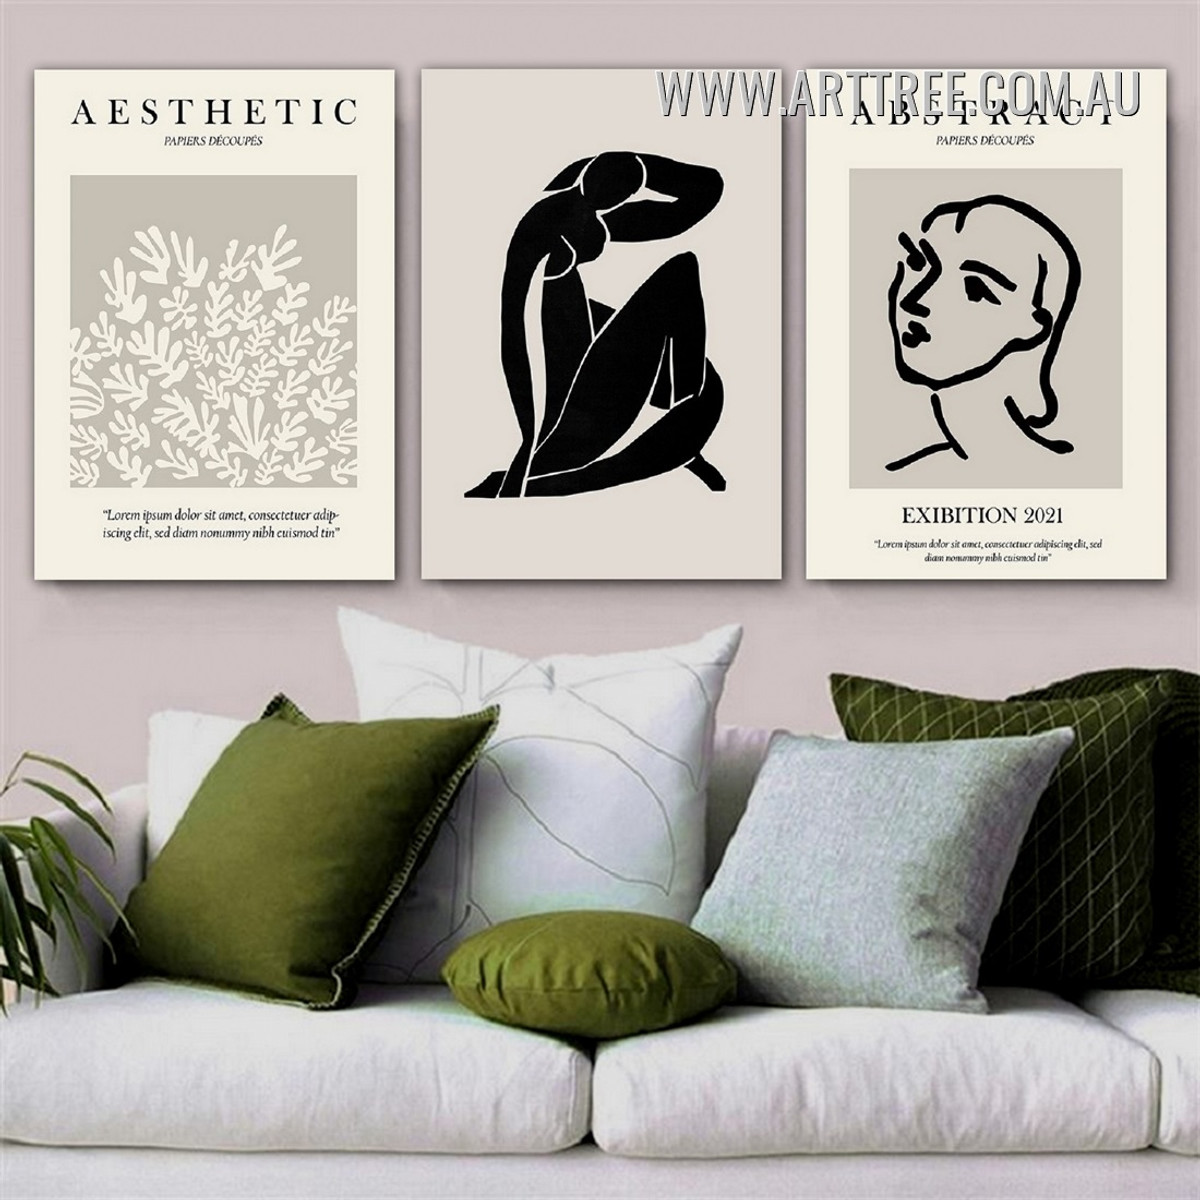 Aesthetic Papiers Decoupes Nude Female Figure Minimalist 3 Piece Framed Scandinavian Painting Photograph Canvas Print for Room Wall Getup